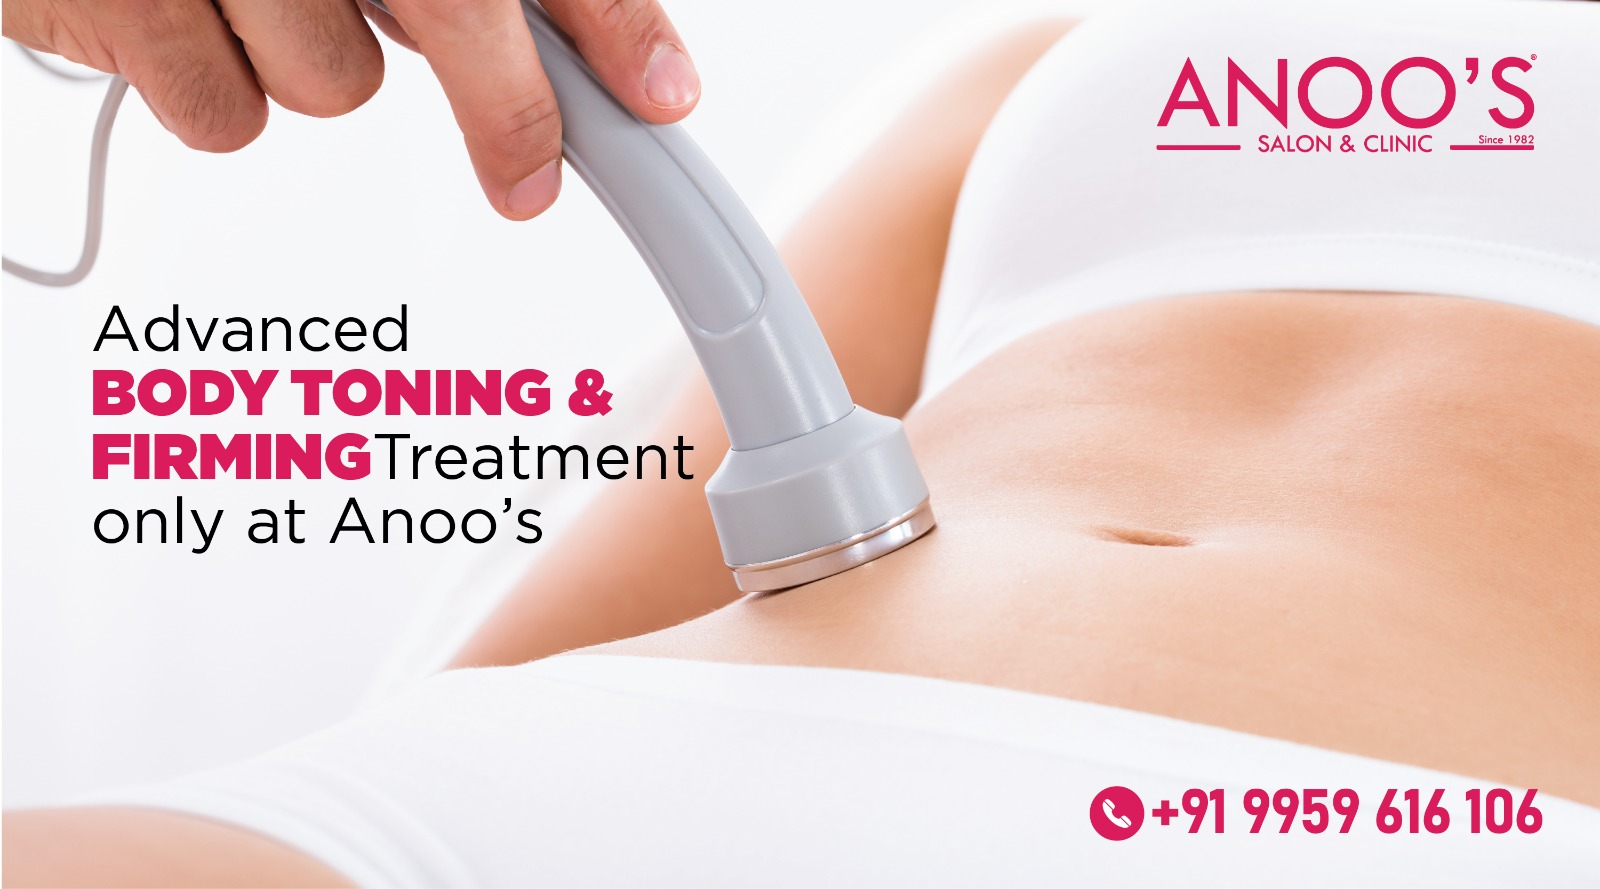 Busting 5 Myths About Body Firming and Toning| Anoos